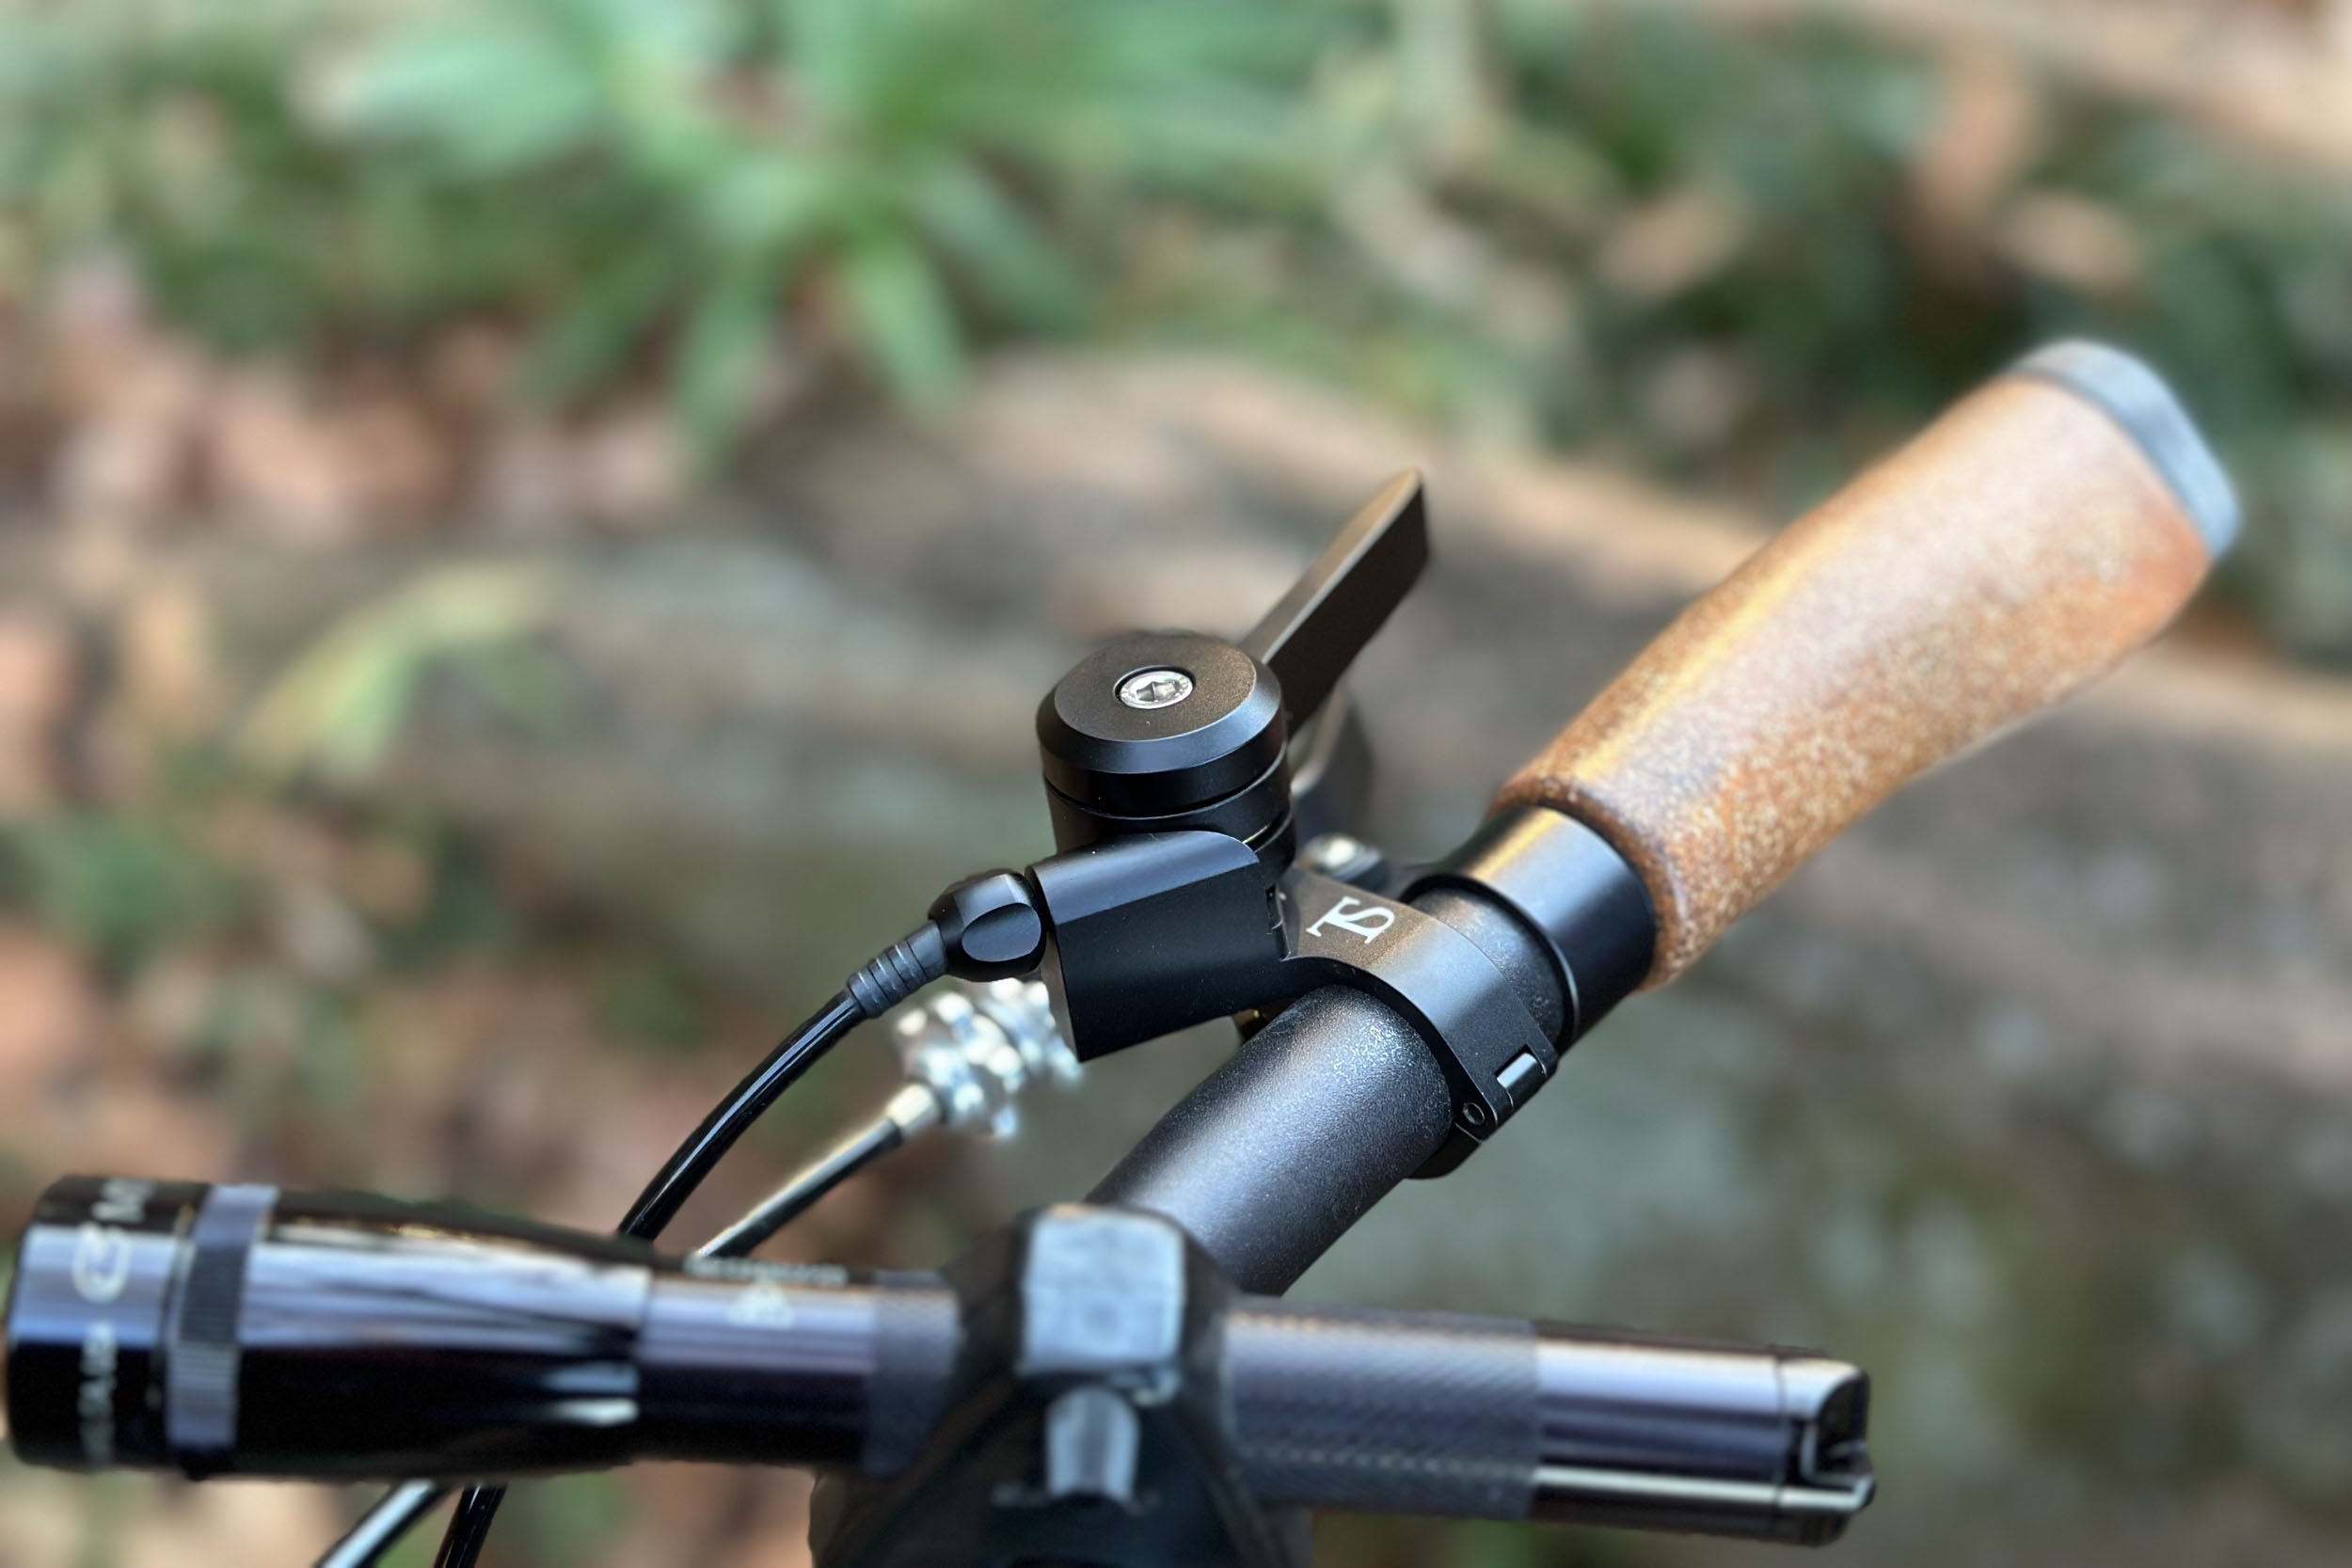 You, Should Try A Friction Thumb Shifter